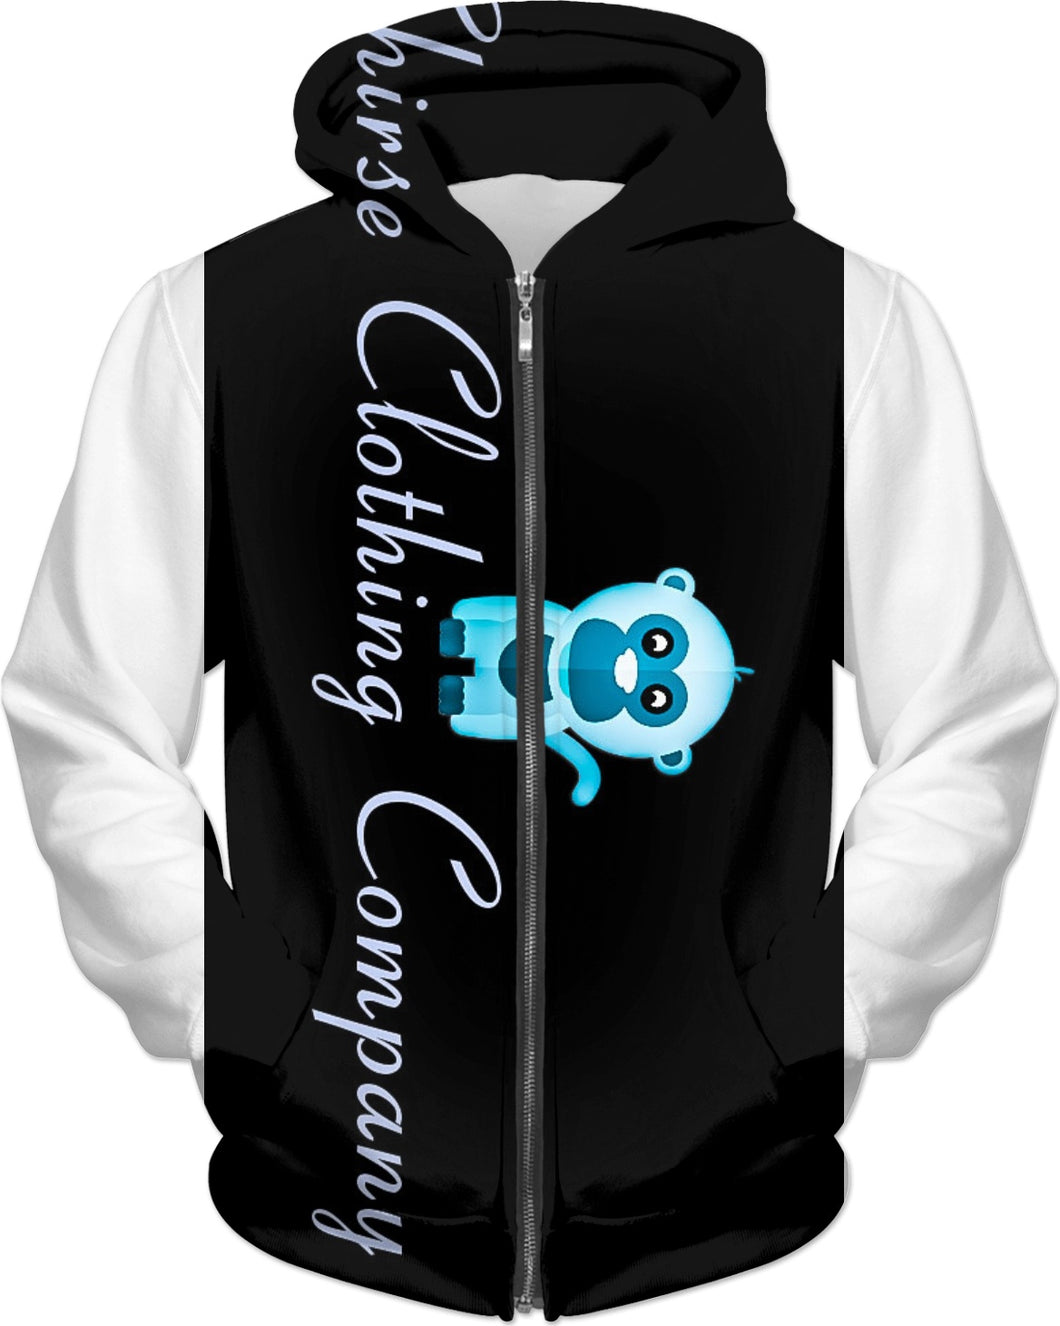 Chirse Clothing Company hoodie - Chirse Clothing Company 